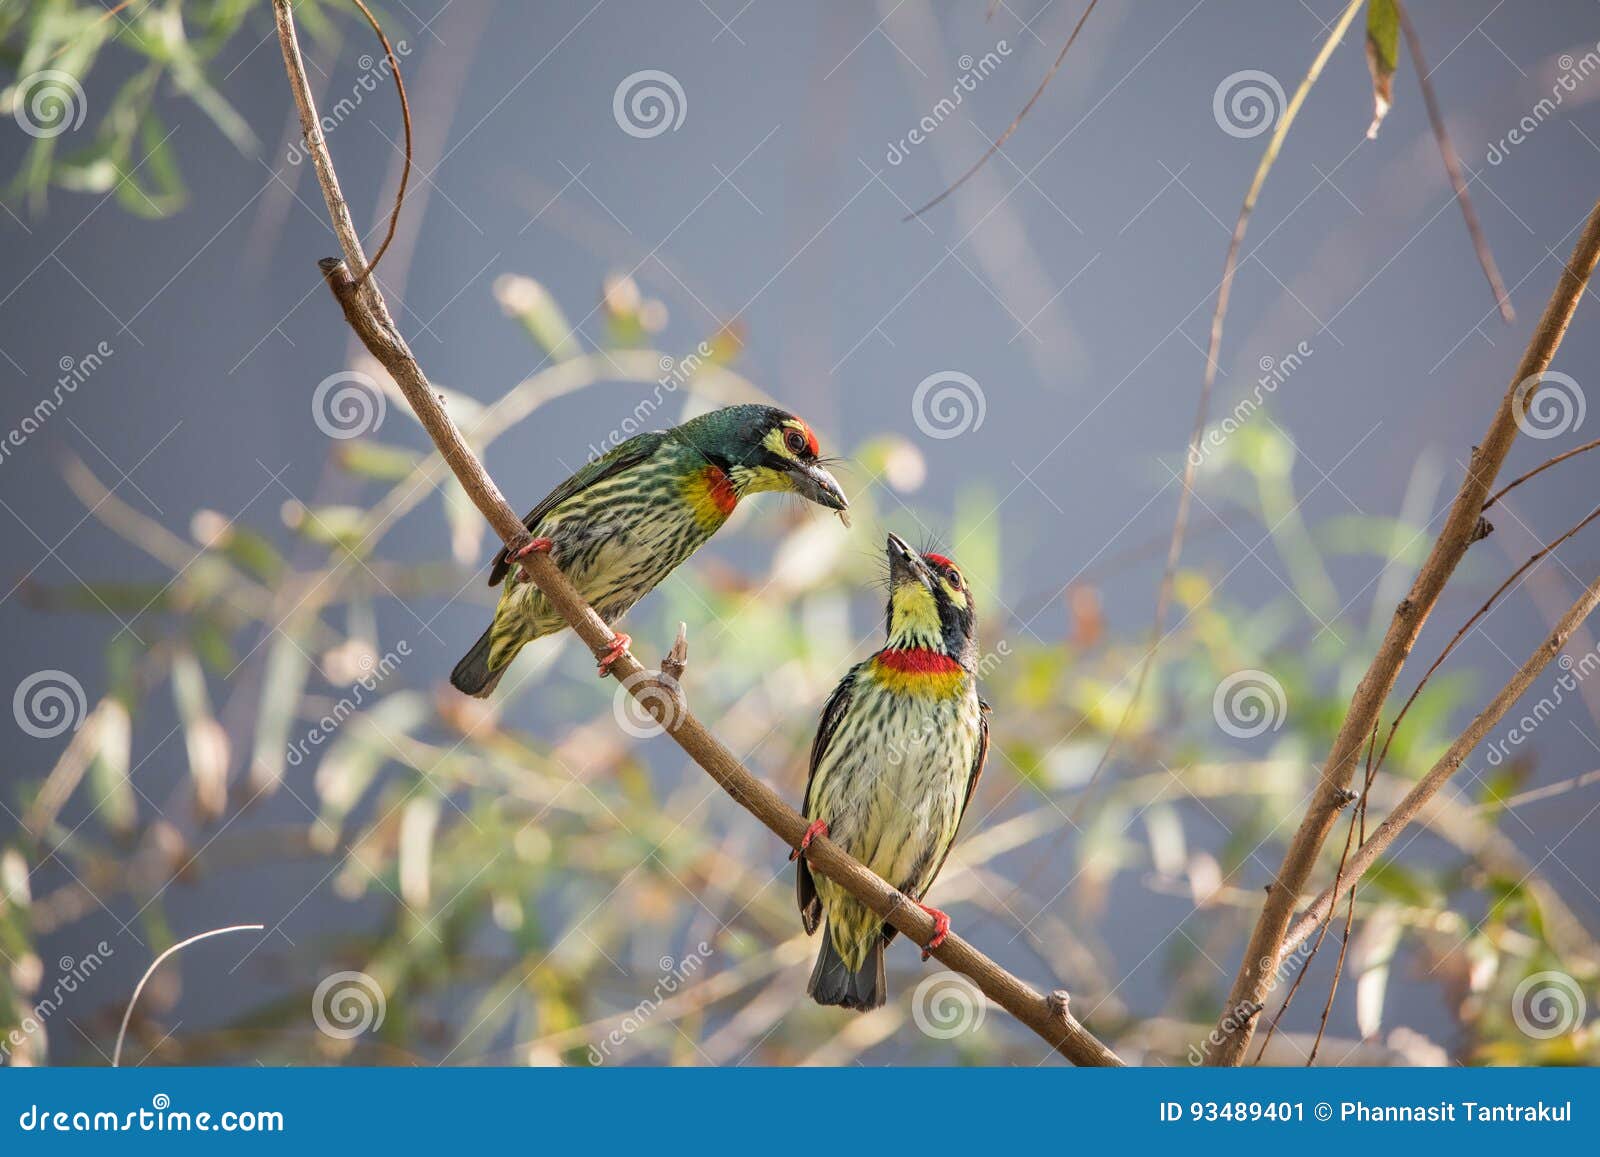 Coppersmith Barbet Royalty-Free Stock Image